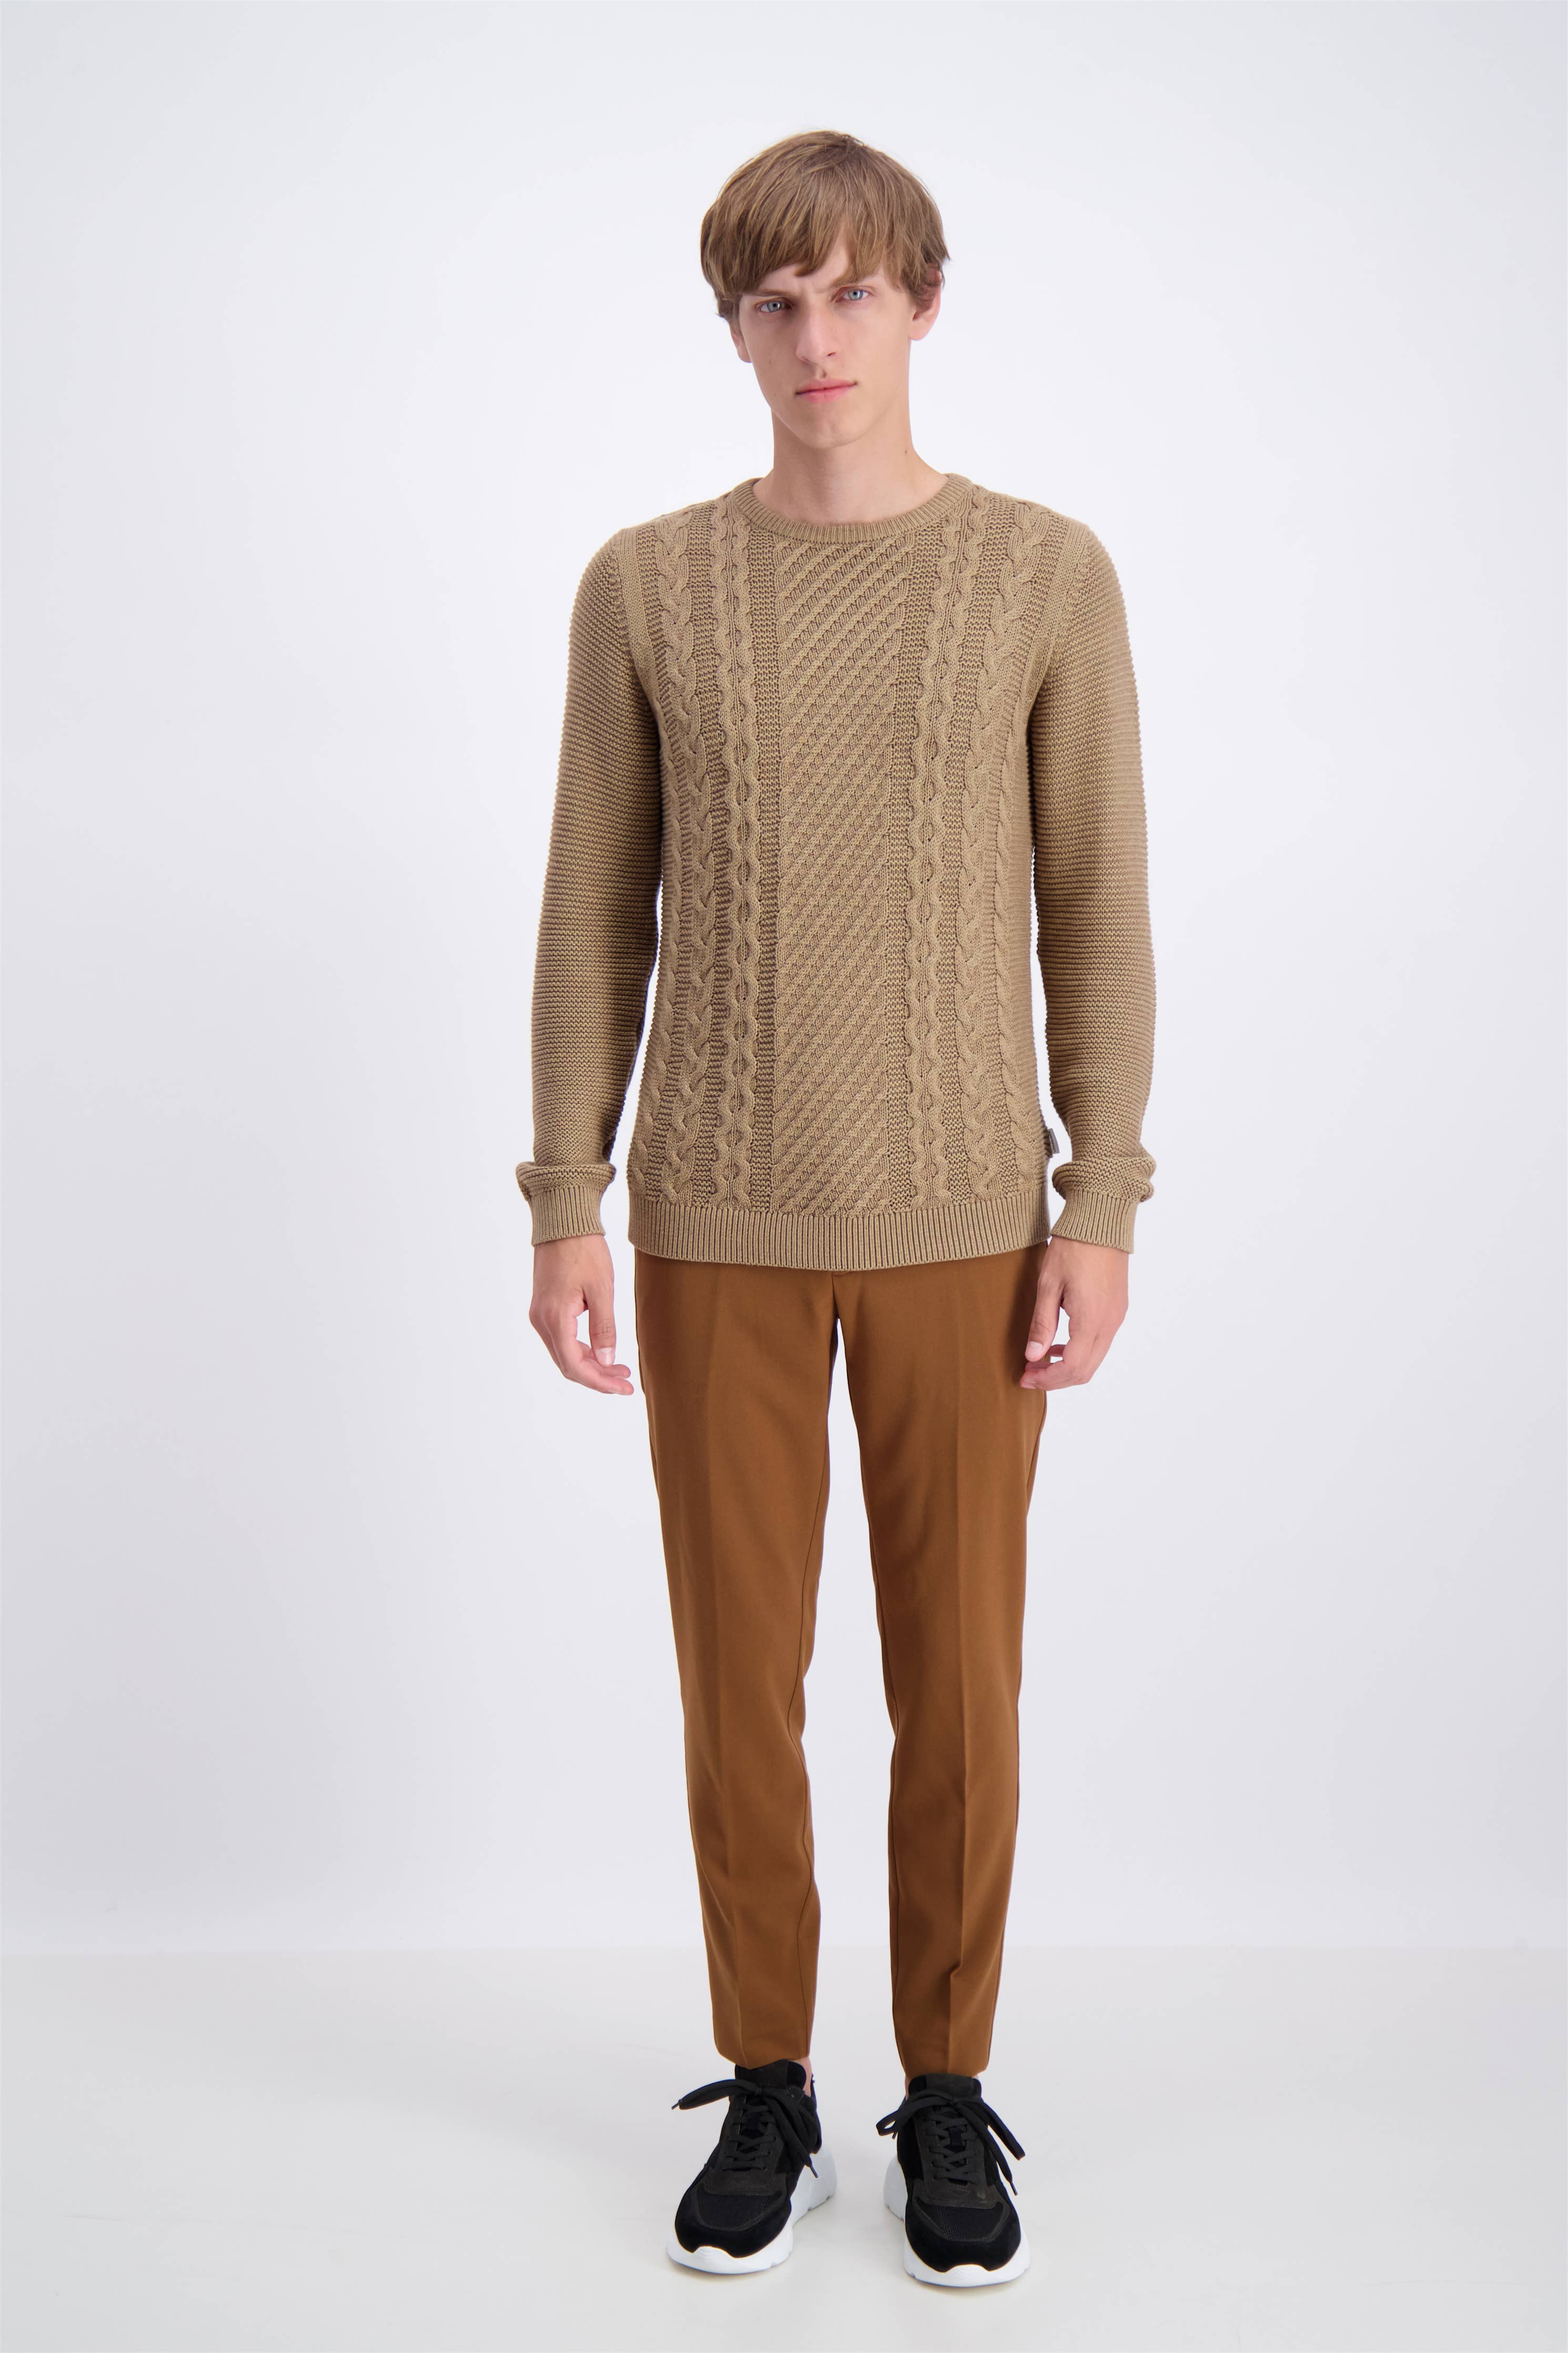 Cable Knit Style Cotton Sweater